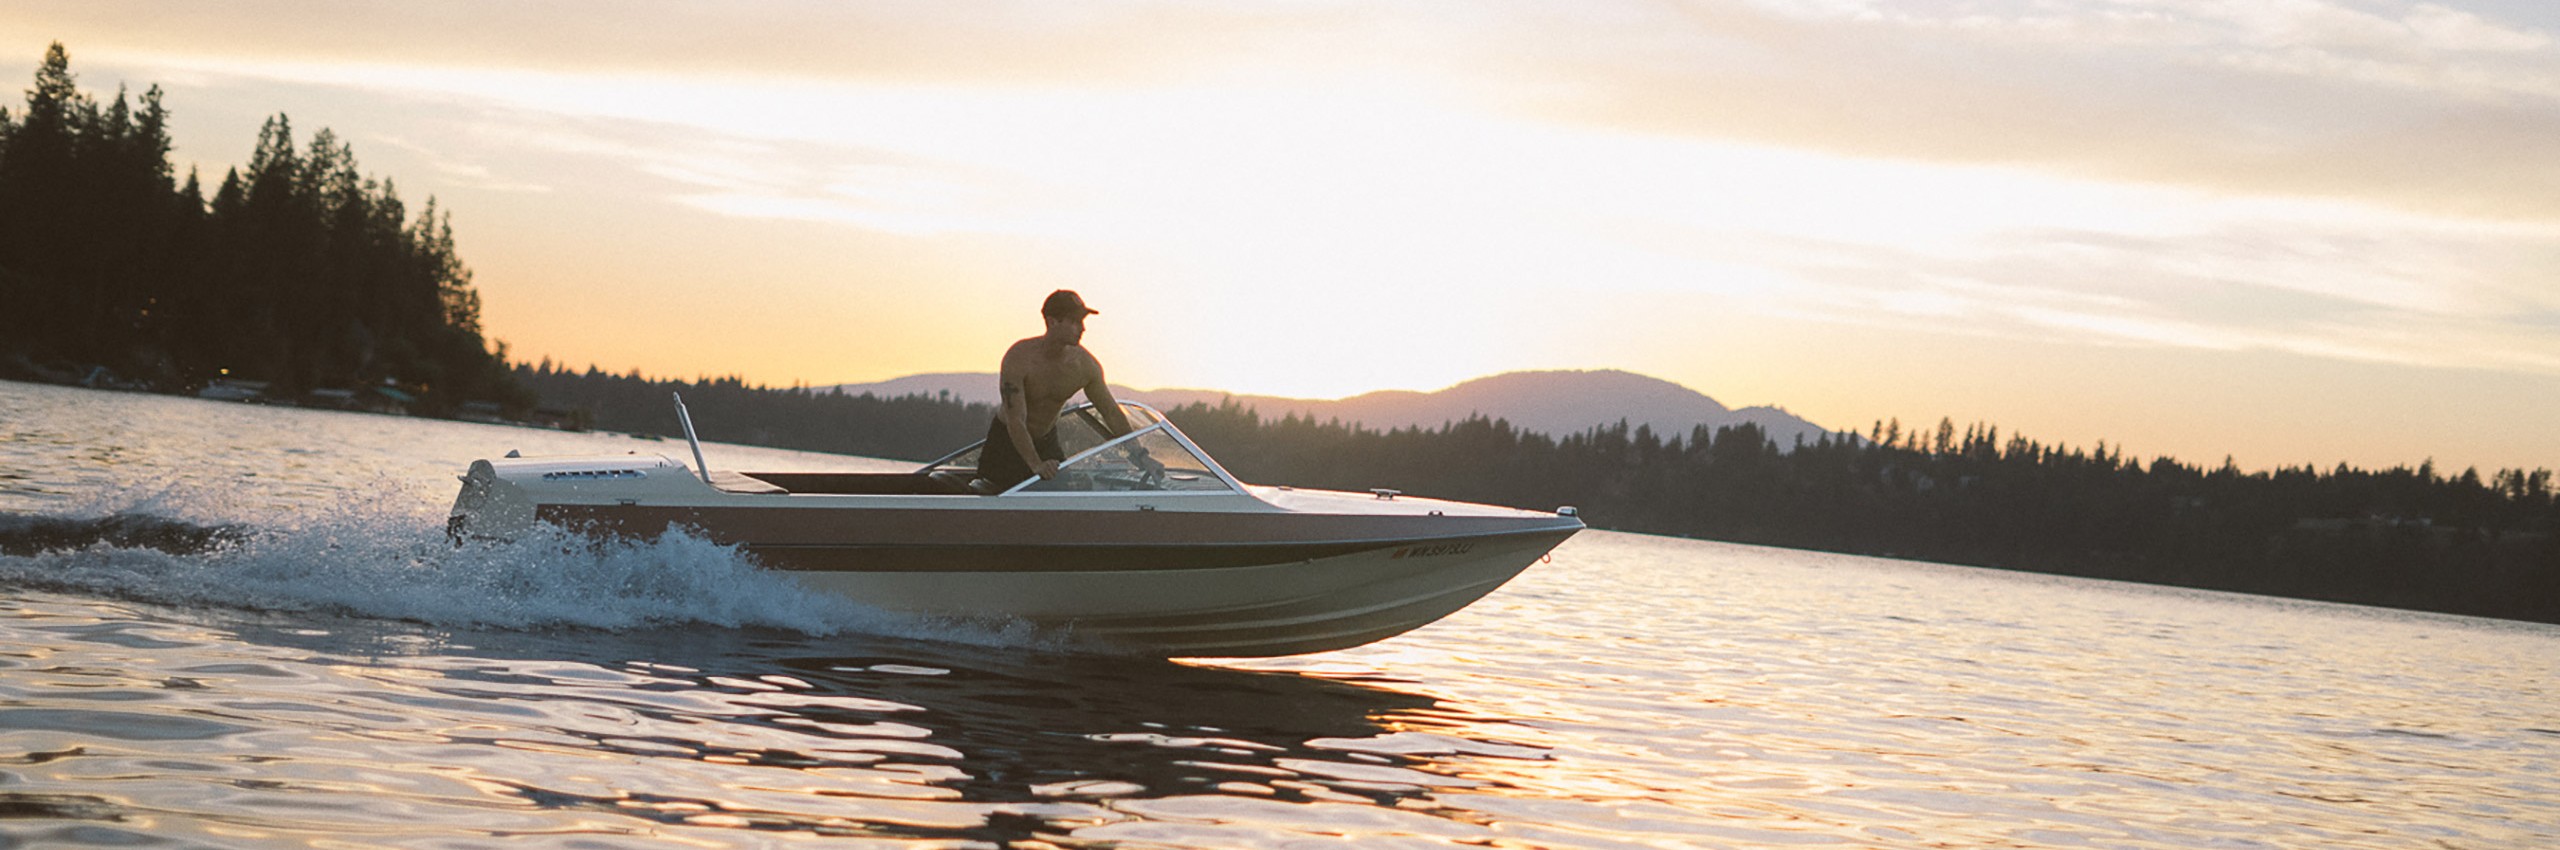 A man driving a boat on Priest Lake at sunset